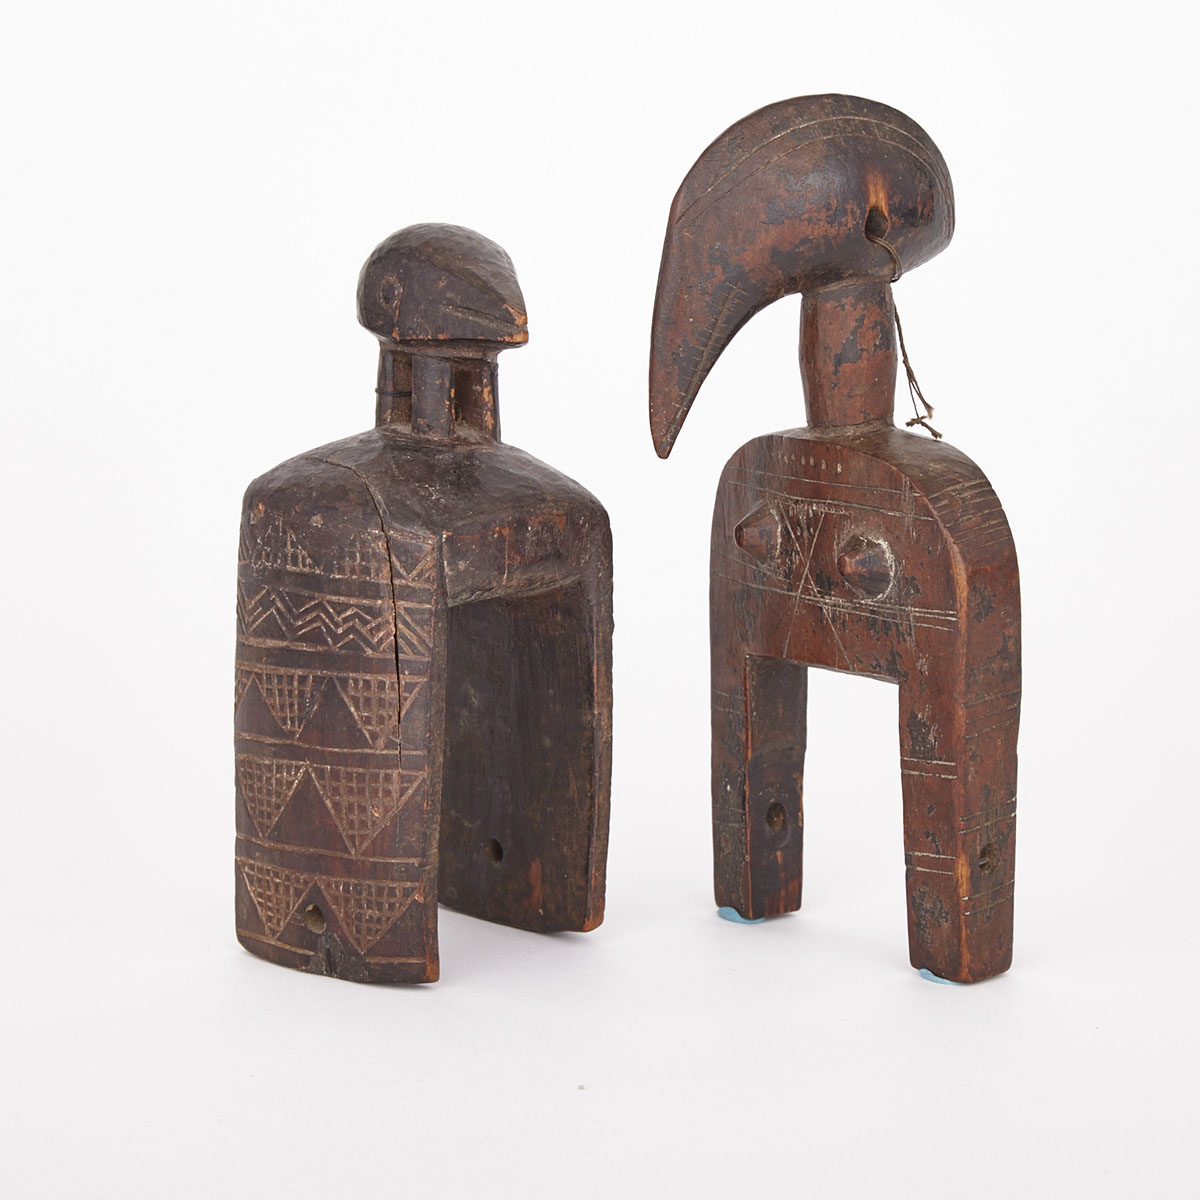 Senufo Carved and Painted Wood Heddle Pulley together with a Bird Form Heddle Pully, former West Africa, latter Africa, both 20th century